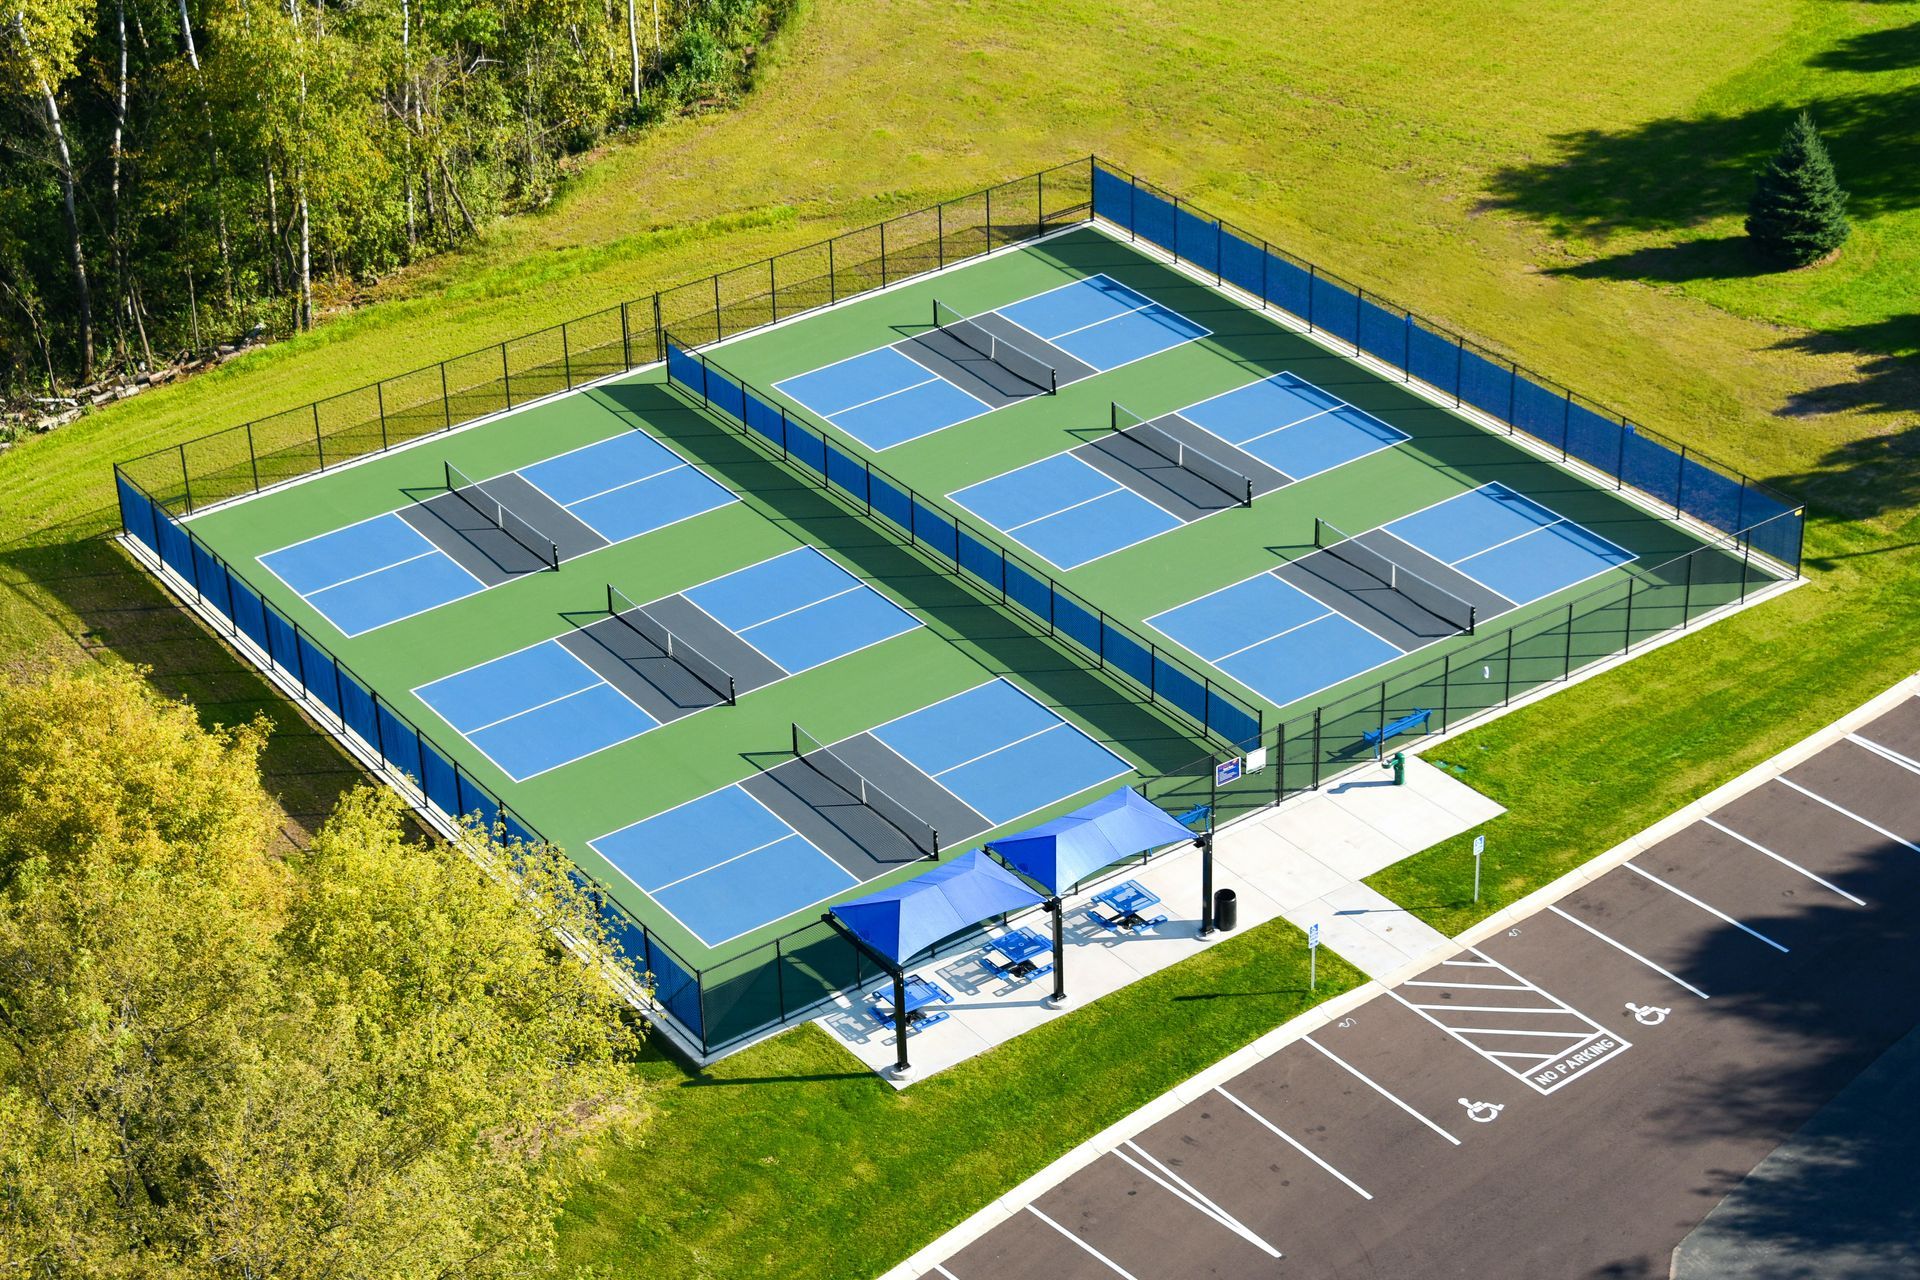 a blue tennis court with a white net